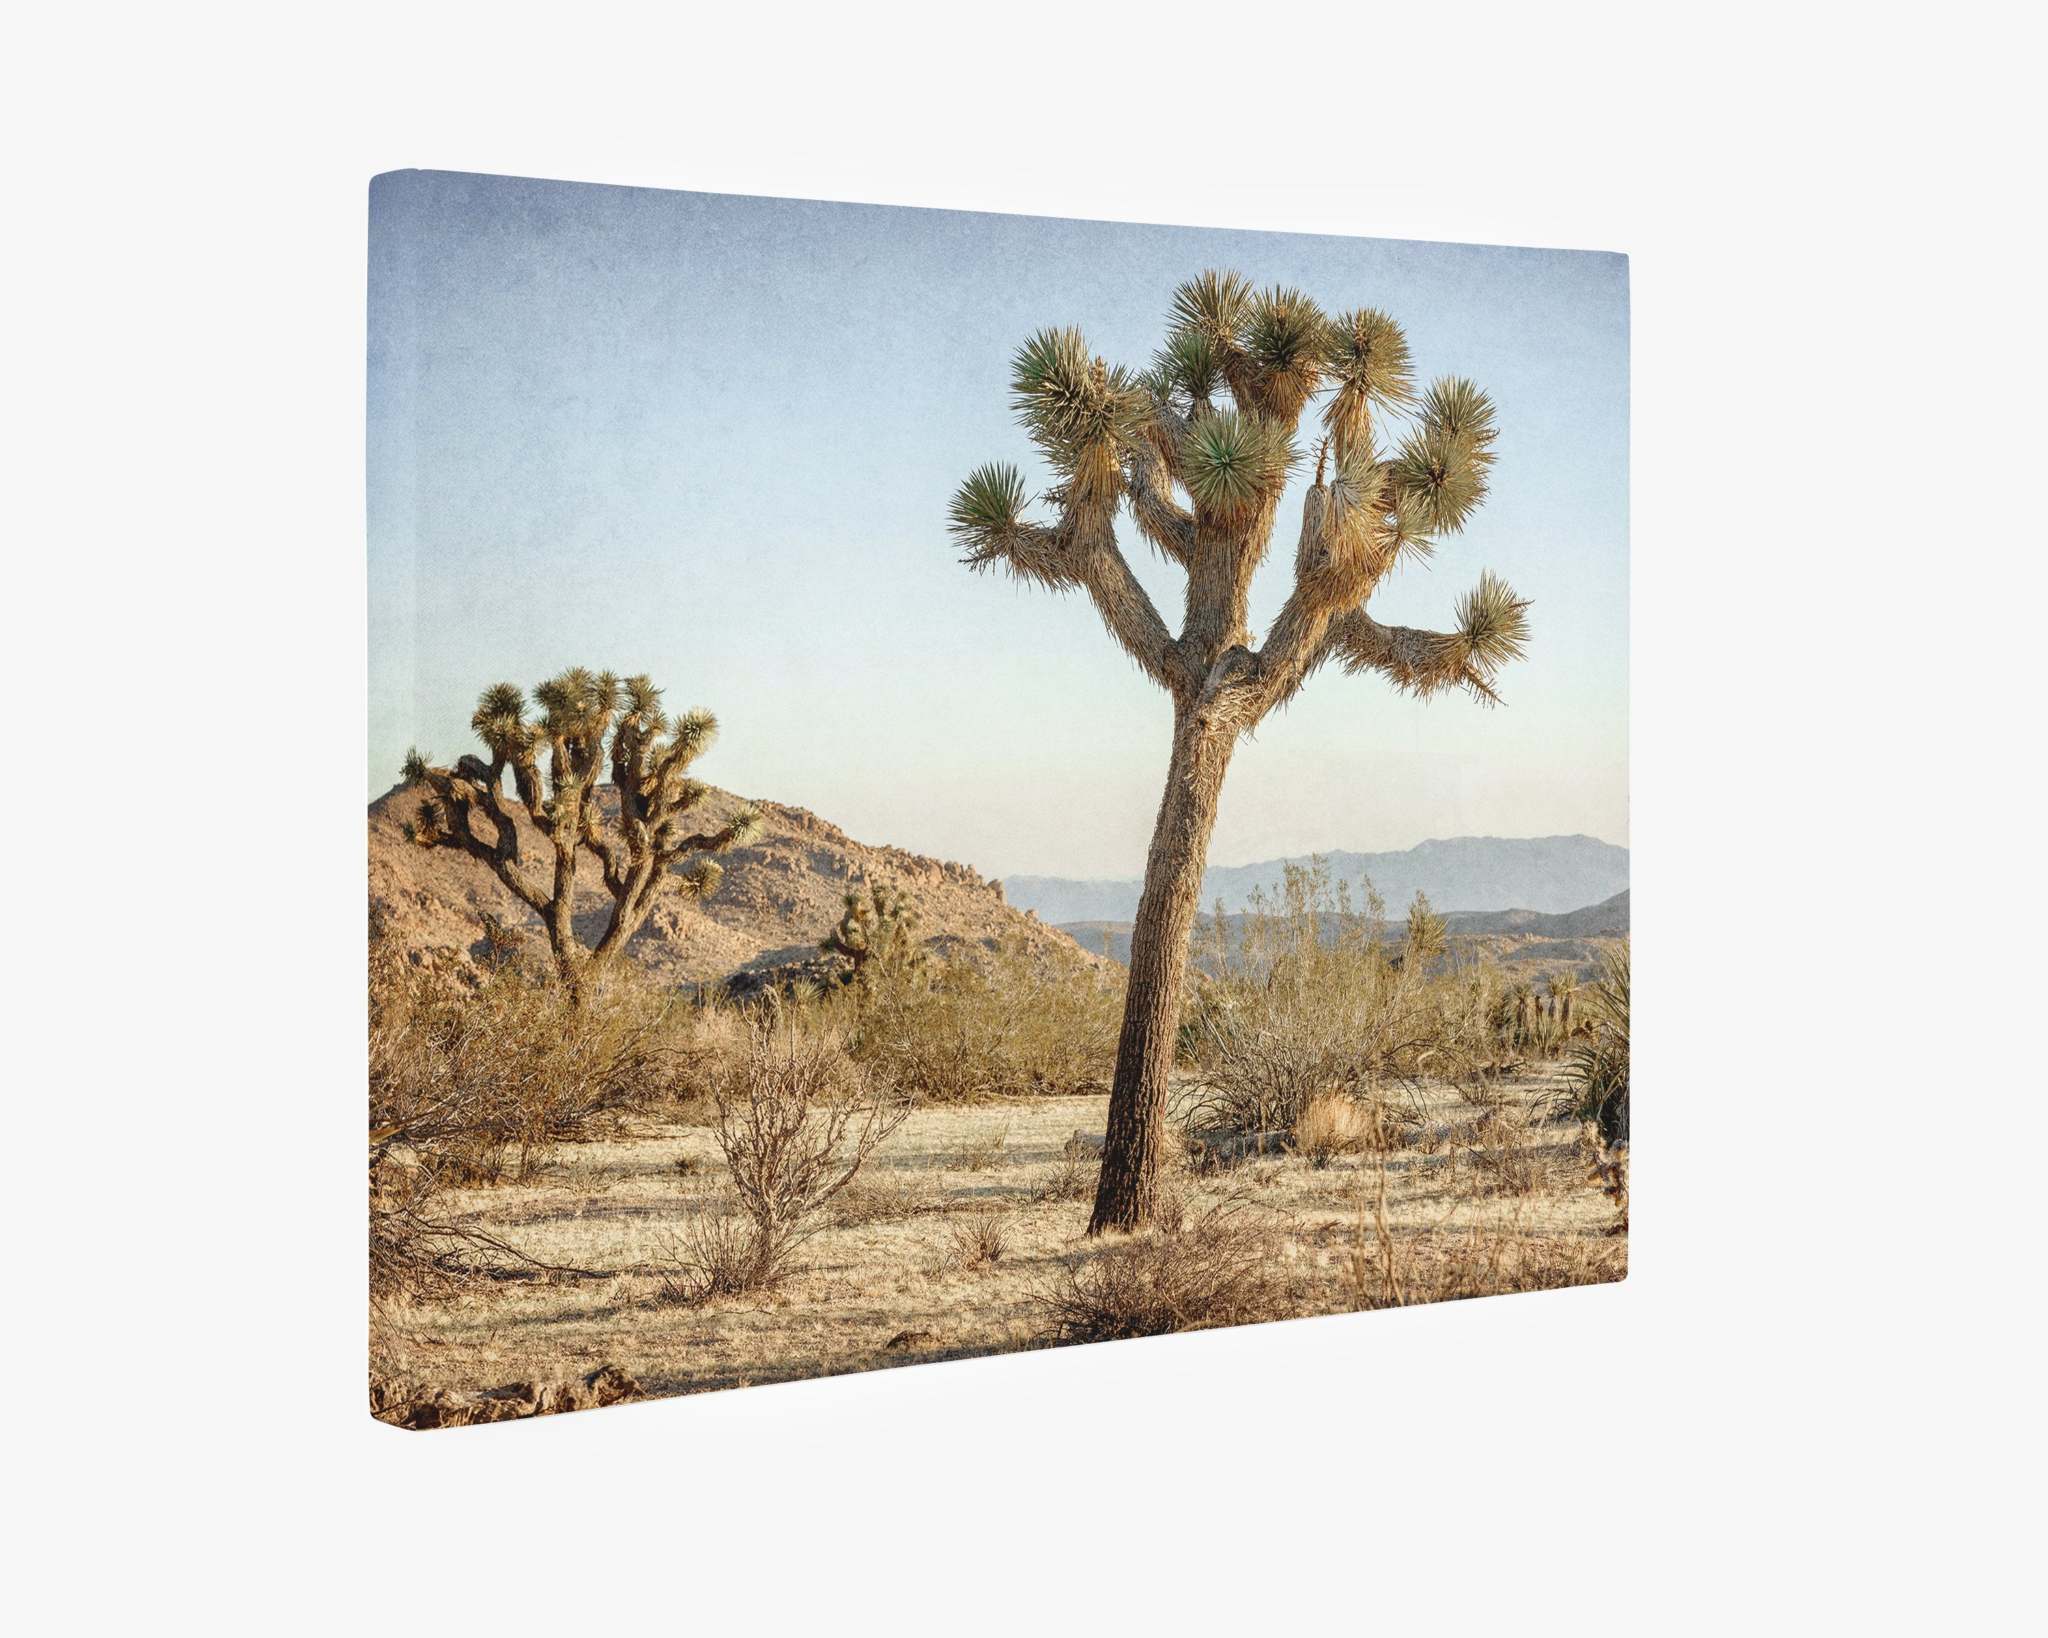 An Offley Green Joshua Tree Canvas Wall Art, 'Mighty Joshua,' featuring a desert landscape with Joshua trees. The scene depicts a clear sky with distant mountains, dry brush, and scattered vegetation in an arid environment, reminiscent of the iconic views found in Joshua Tree National Park.